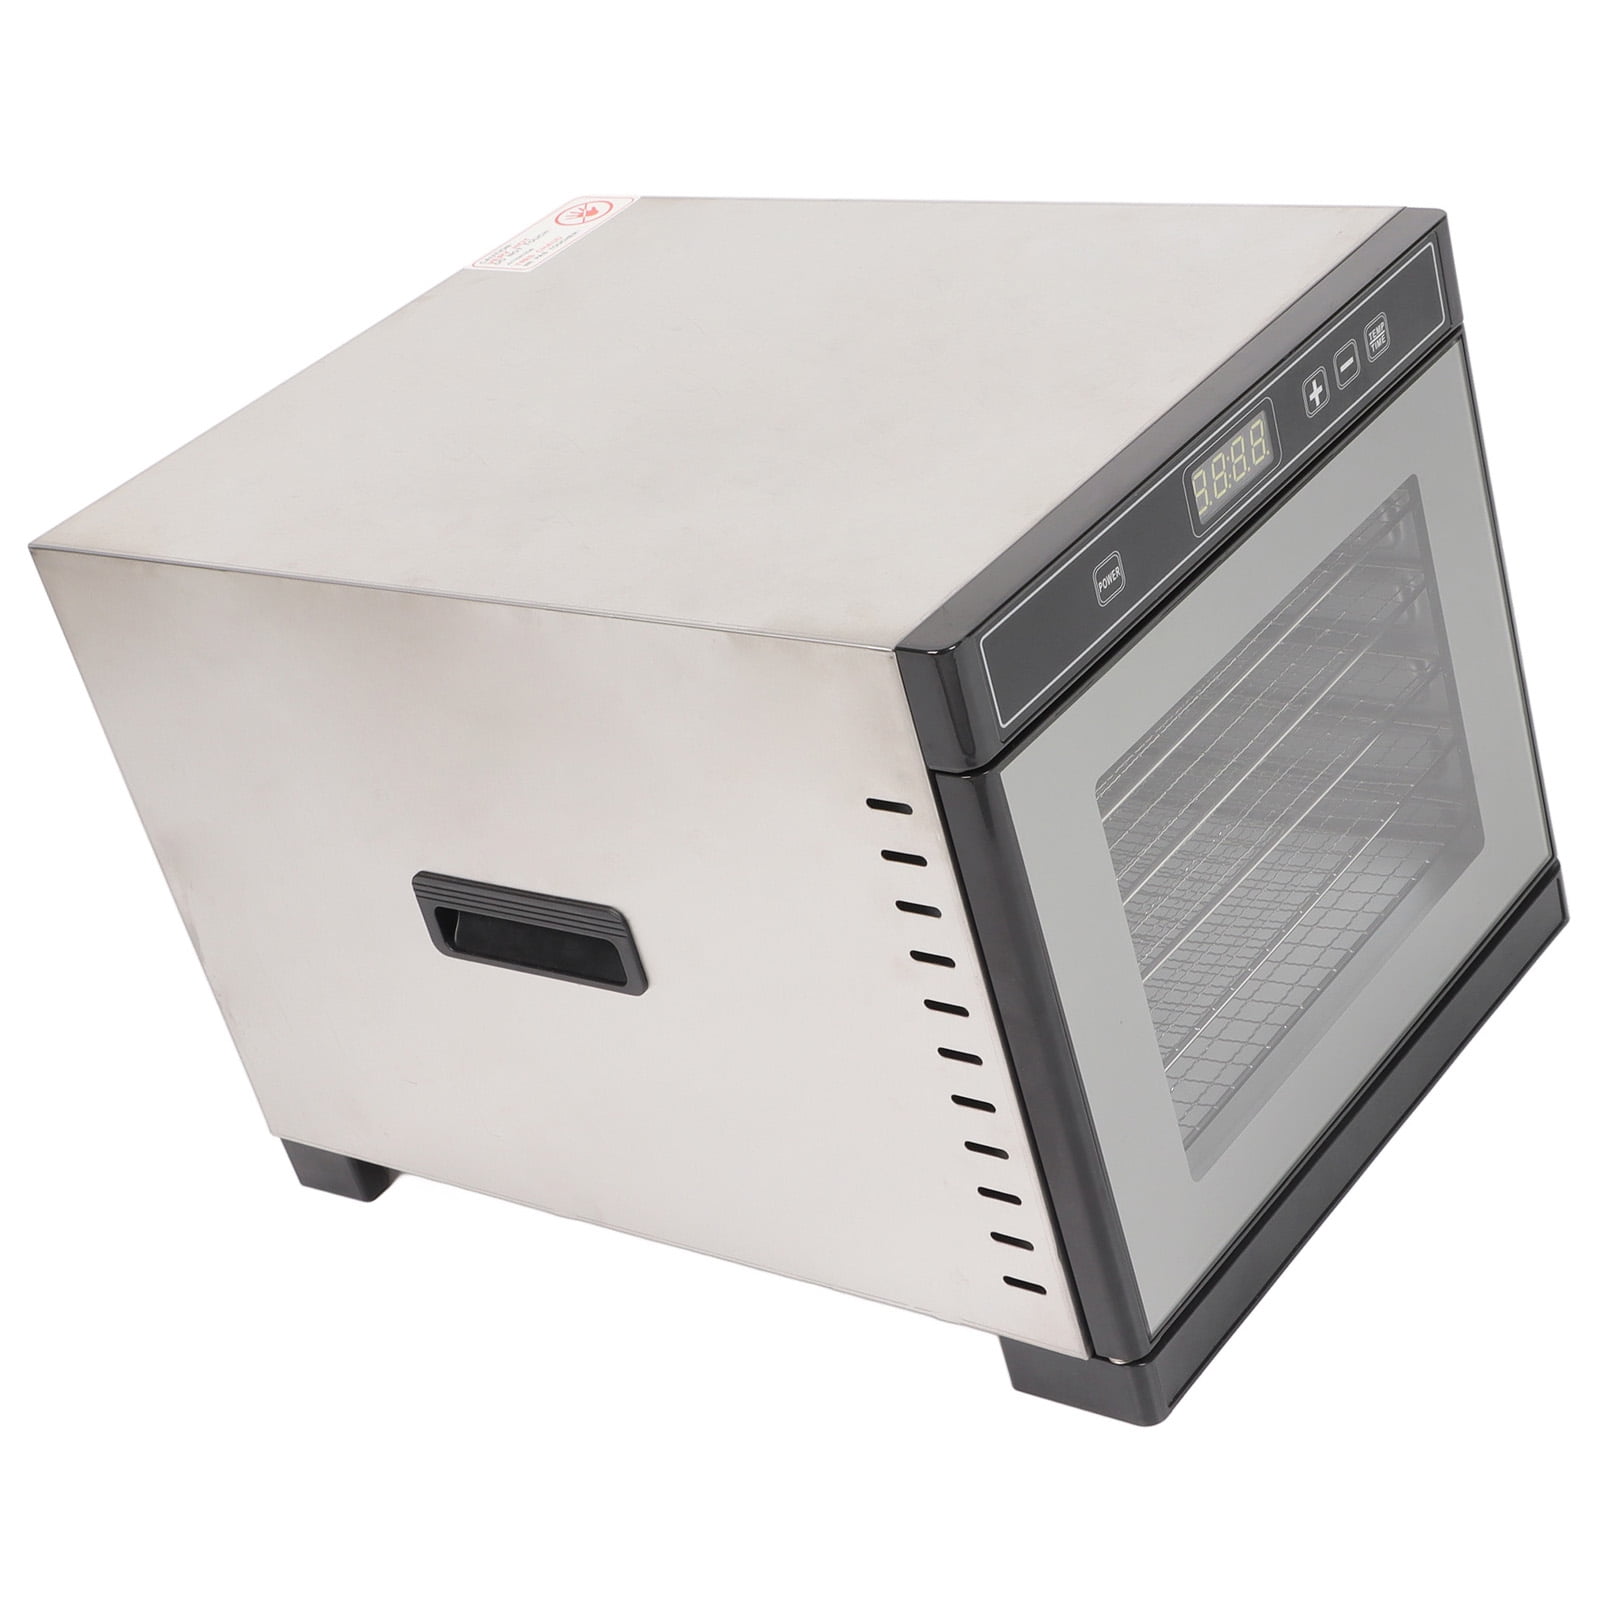 Buy Wholesale China 2022 Electric Hot Air Food Dehydrator Dryer 96